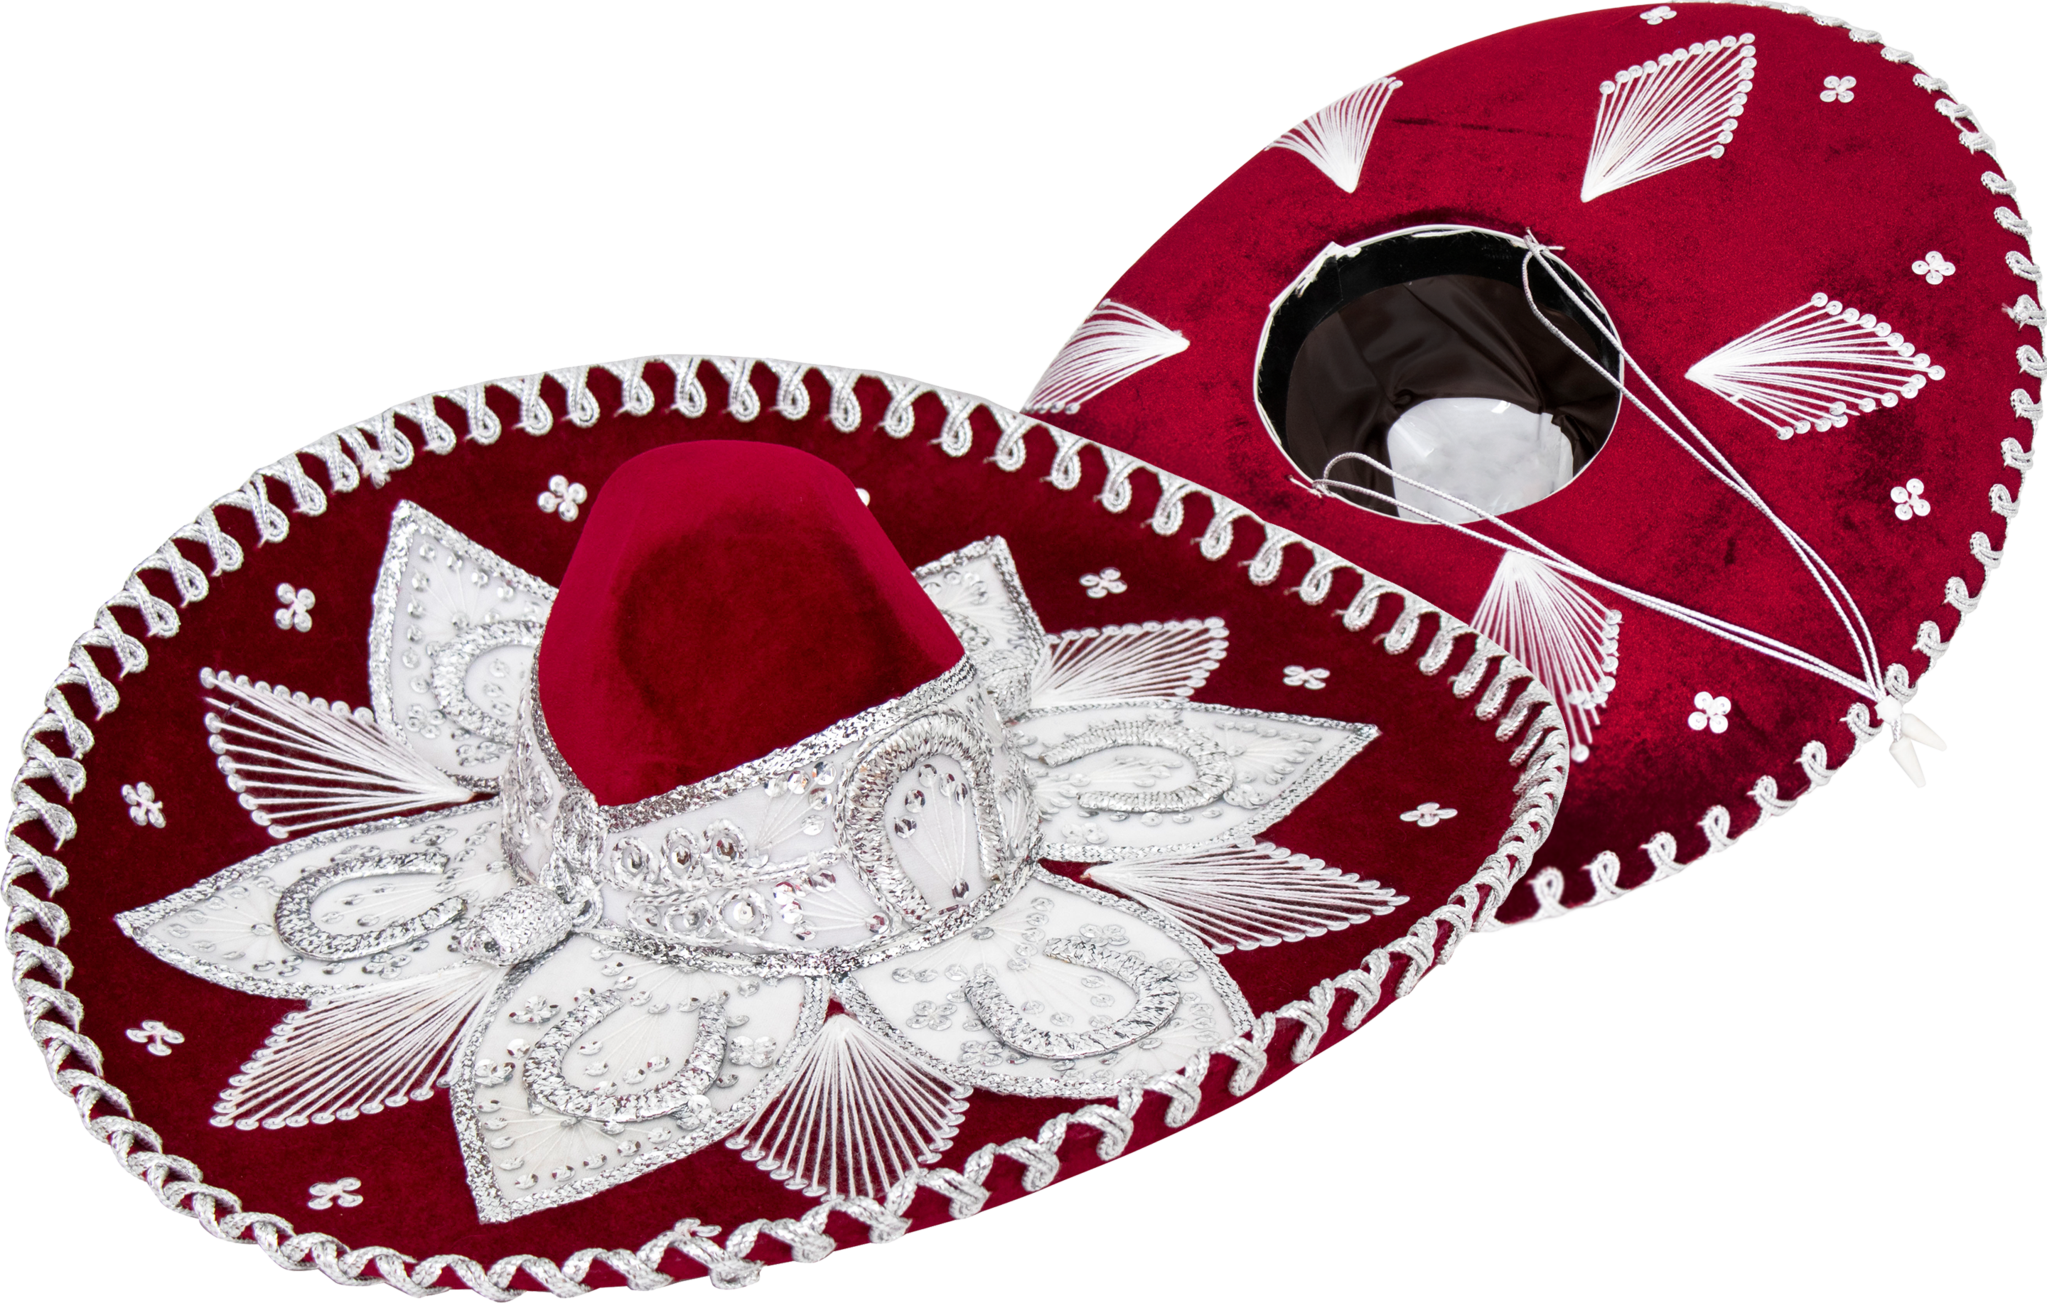 A Red And White Sombrero